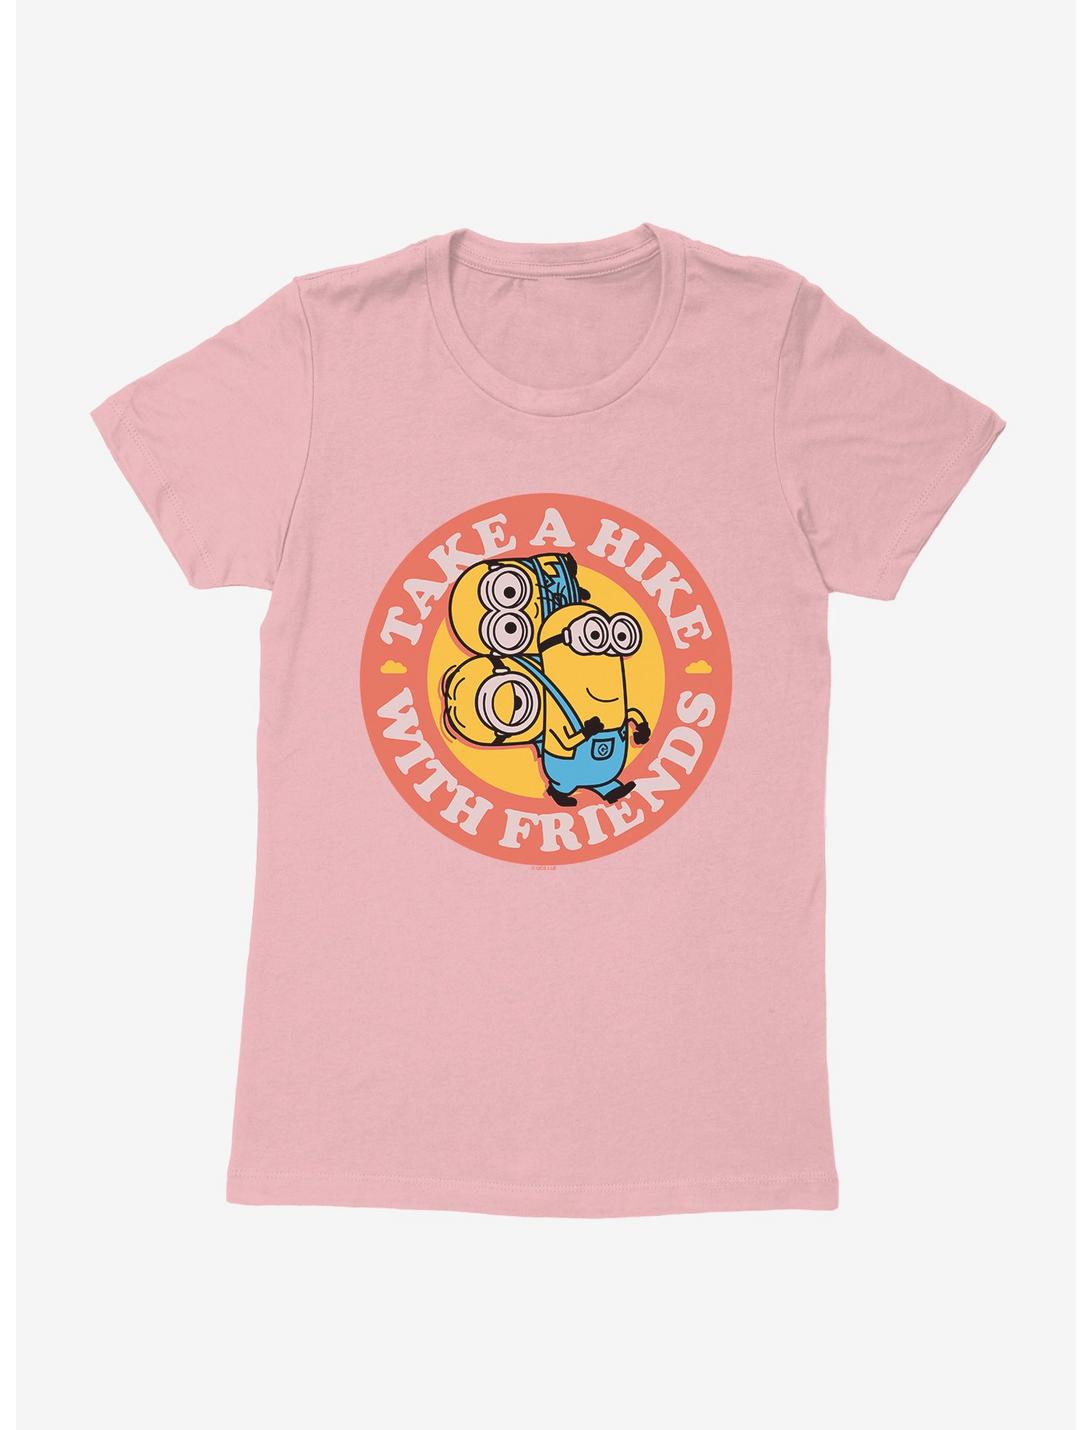 Minions Hike With Friends Womens T-Shirt, LIGHT PINK, hi-res